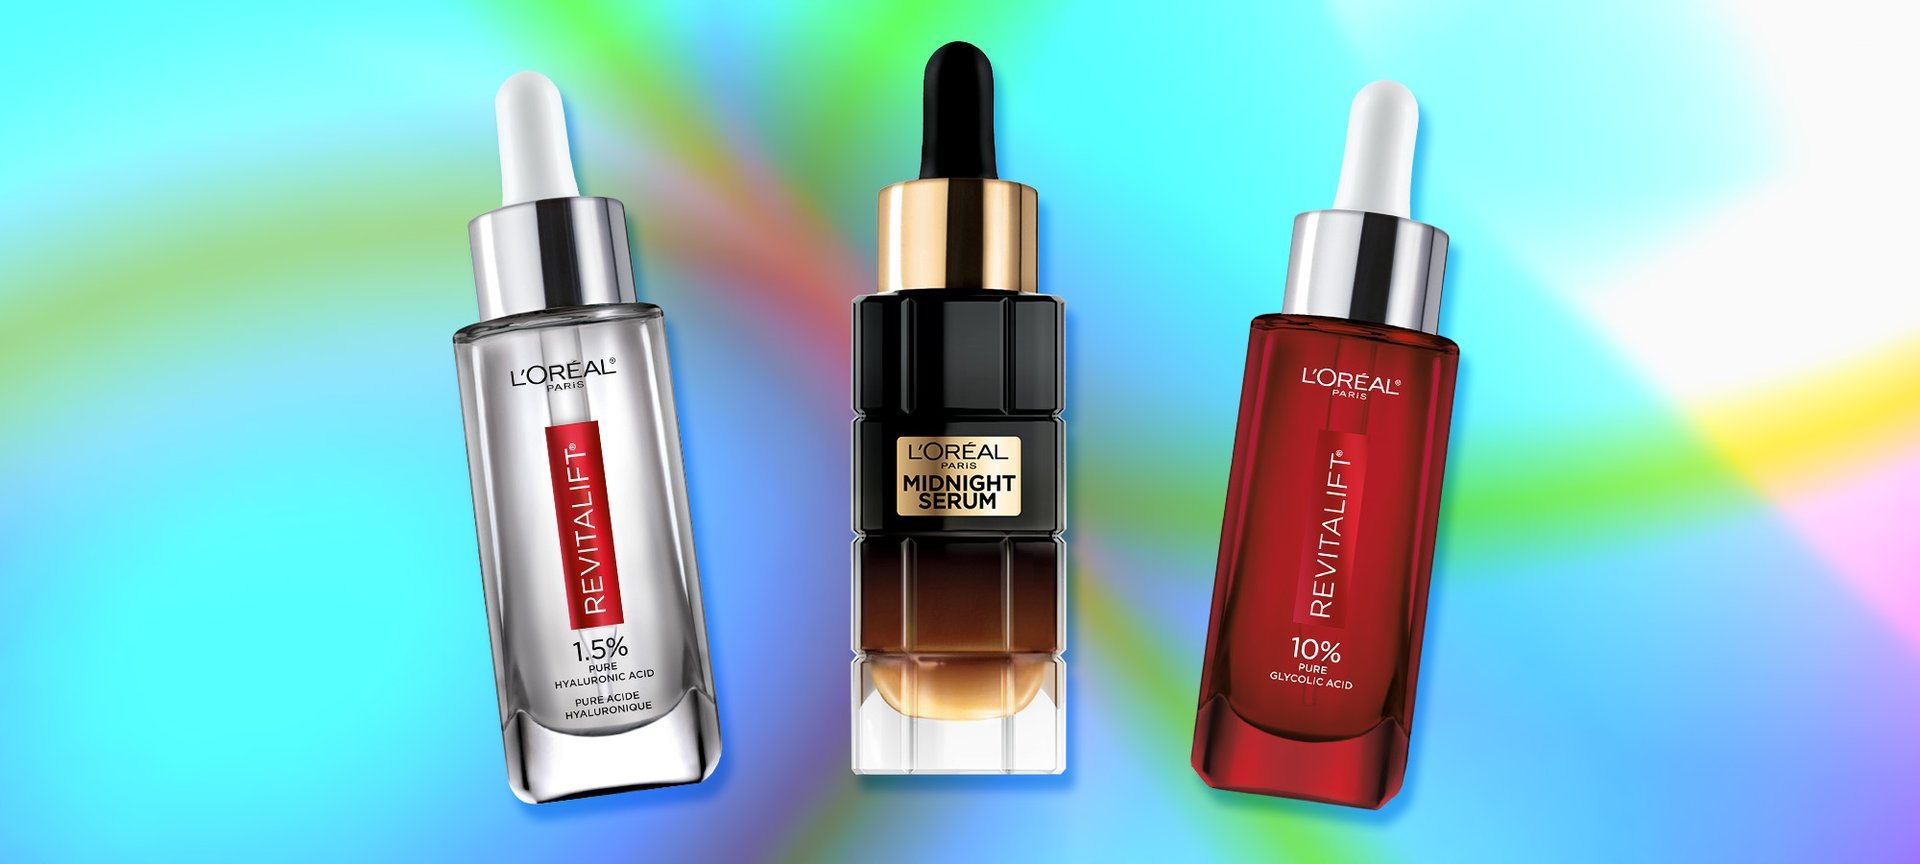 7 Reasons Why You Need A Face Serum In Your Routine - L’Oréal Paris